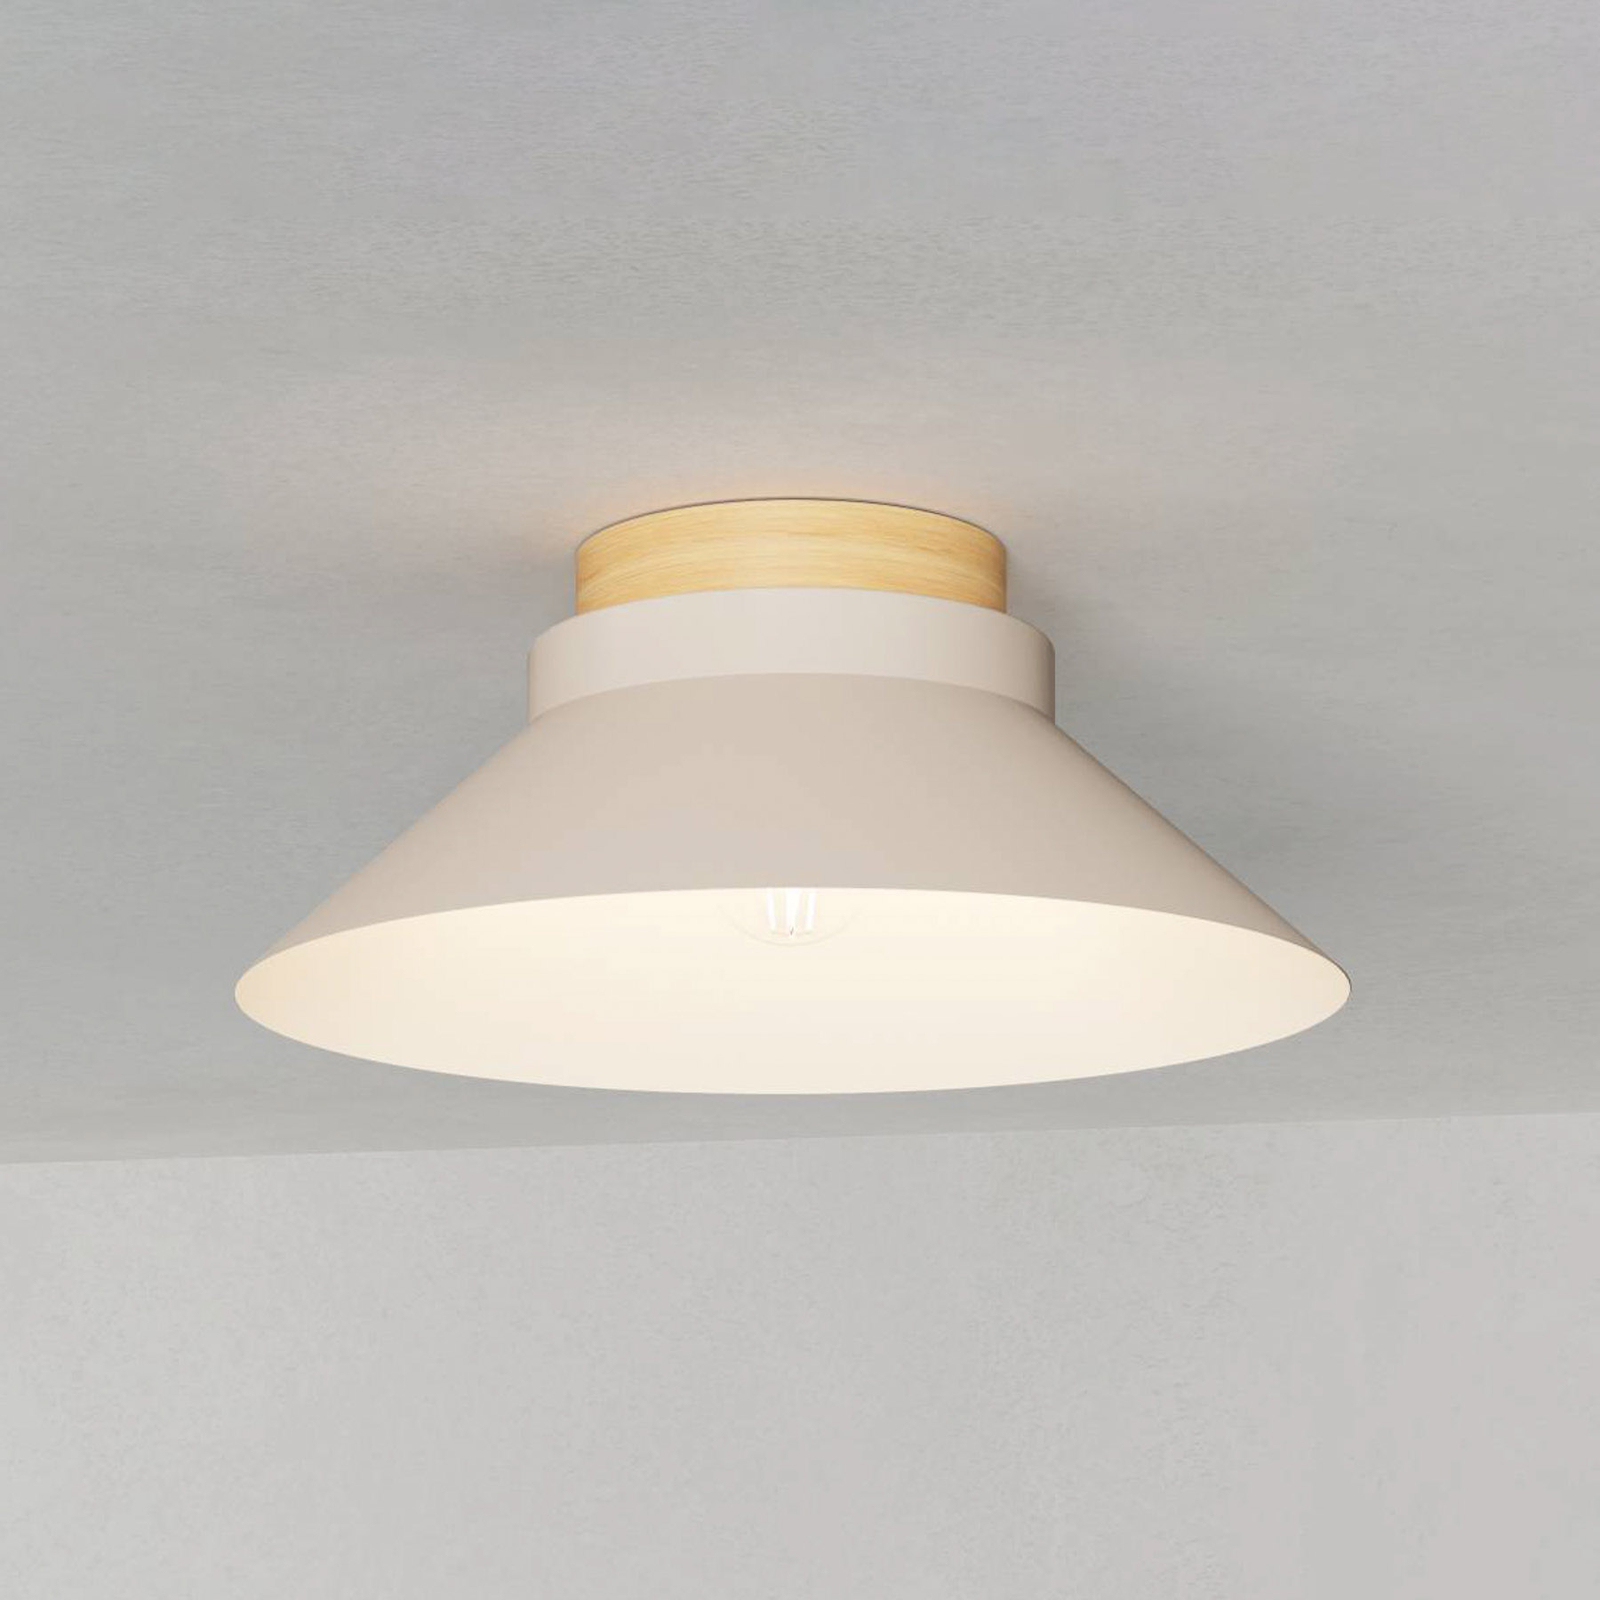 Moharras ceiling light, sand with wooden detail